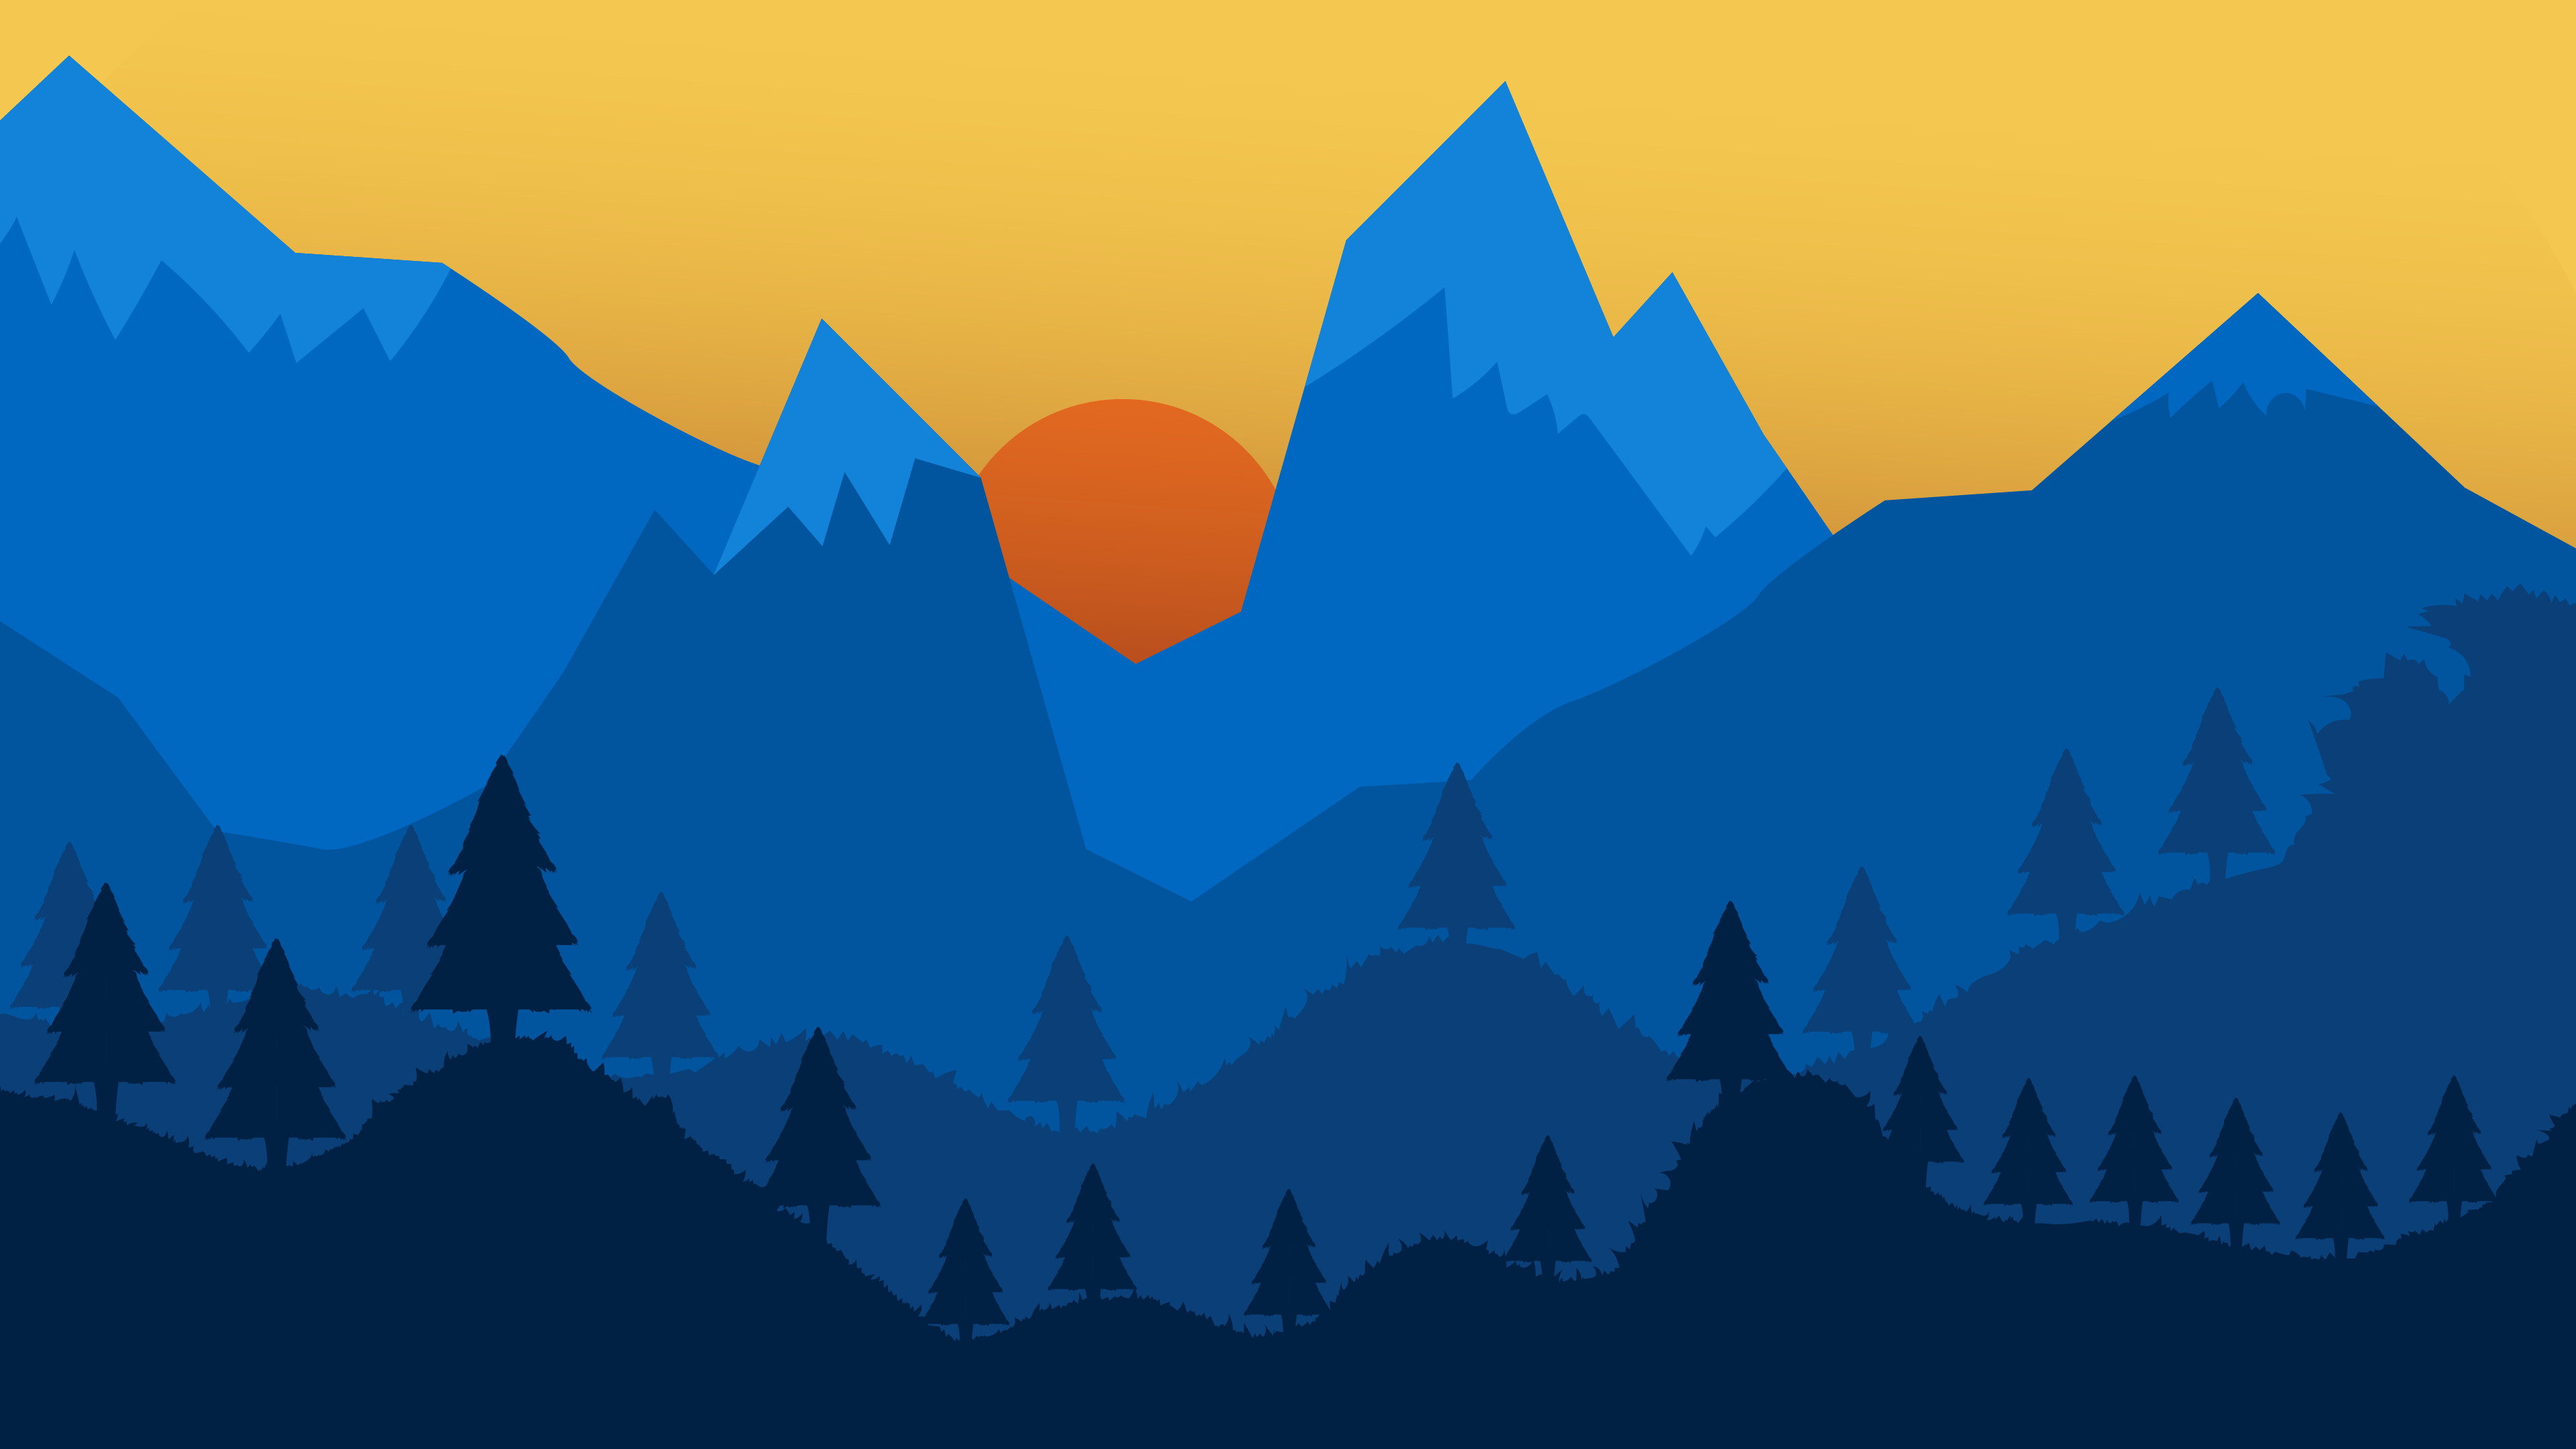 Minimal Mountains With Forest 4K wallpaper